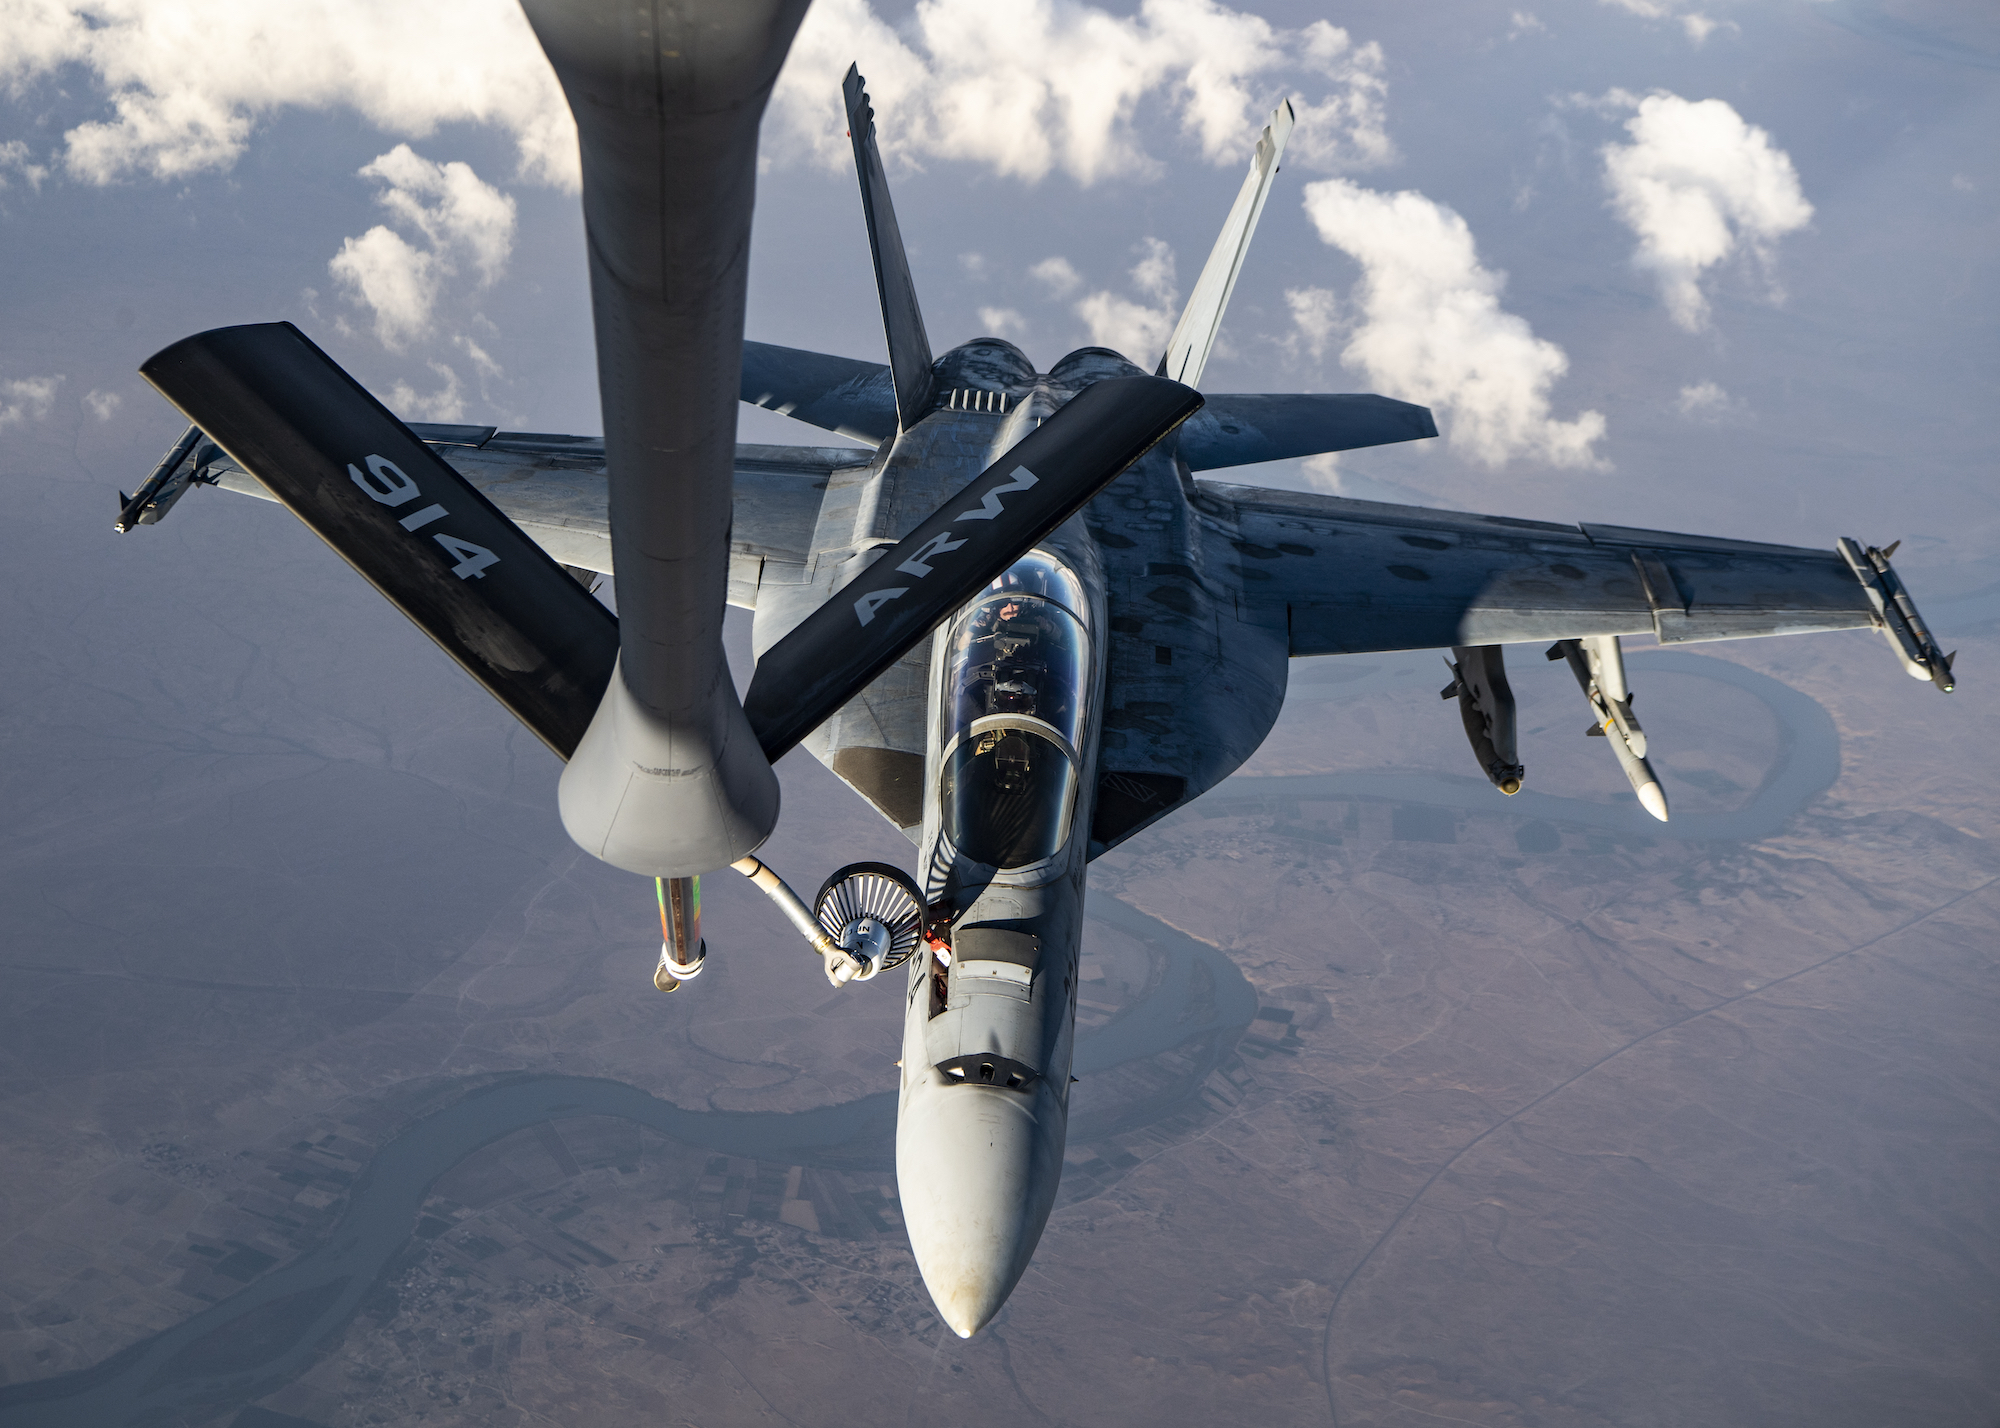 A F/A-18 Super Hornet is refueled the traditional way: by an aircraft with humans on board.